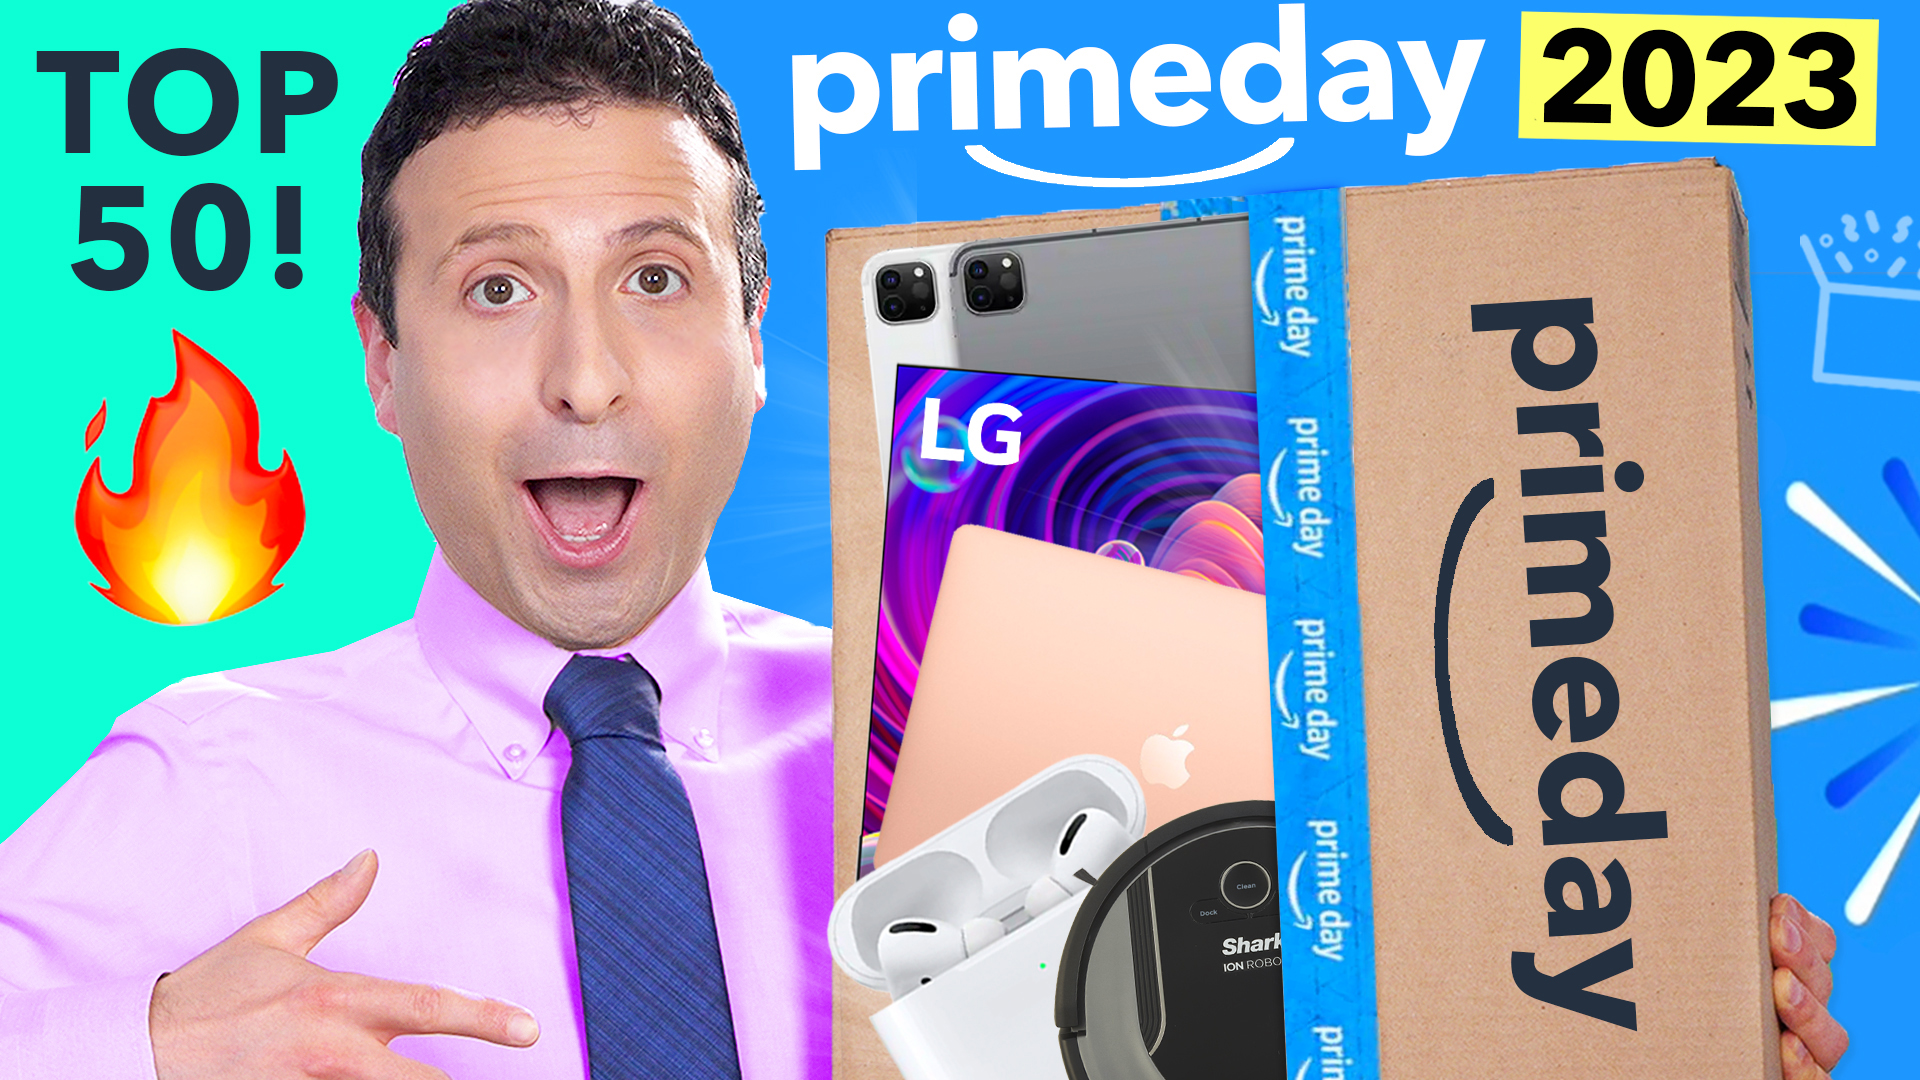 Top 50 Prime Day Deals 2023! The Deal Guy